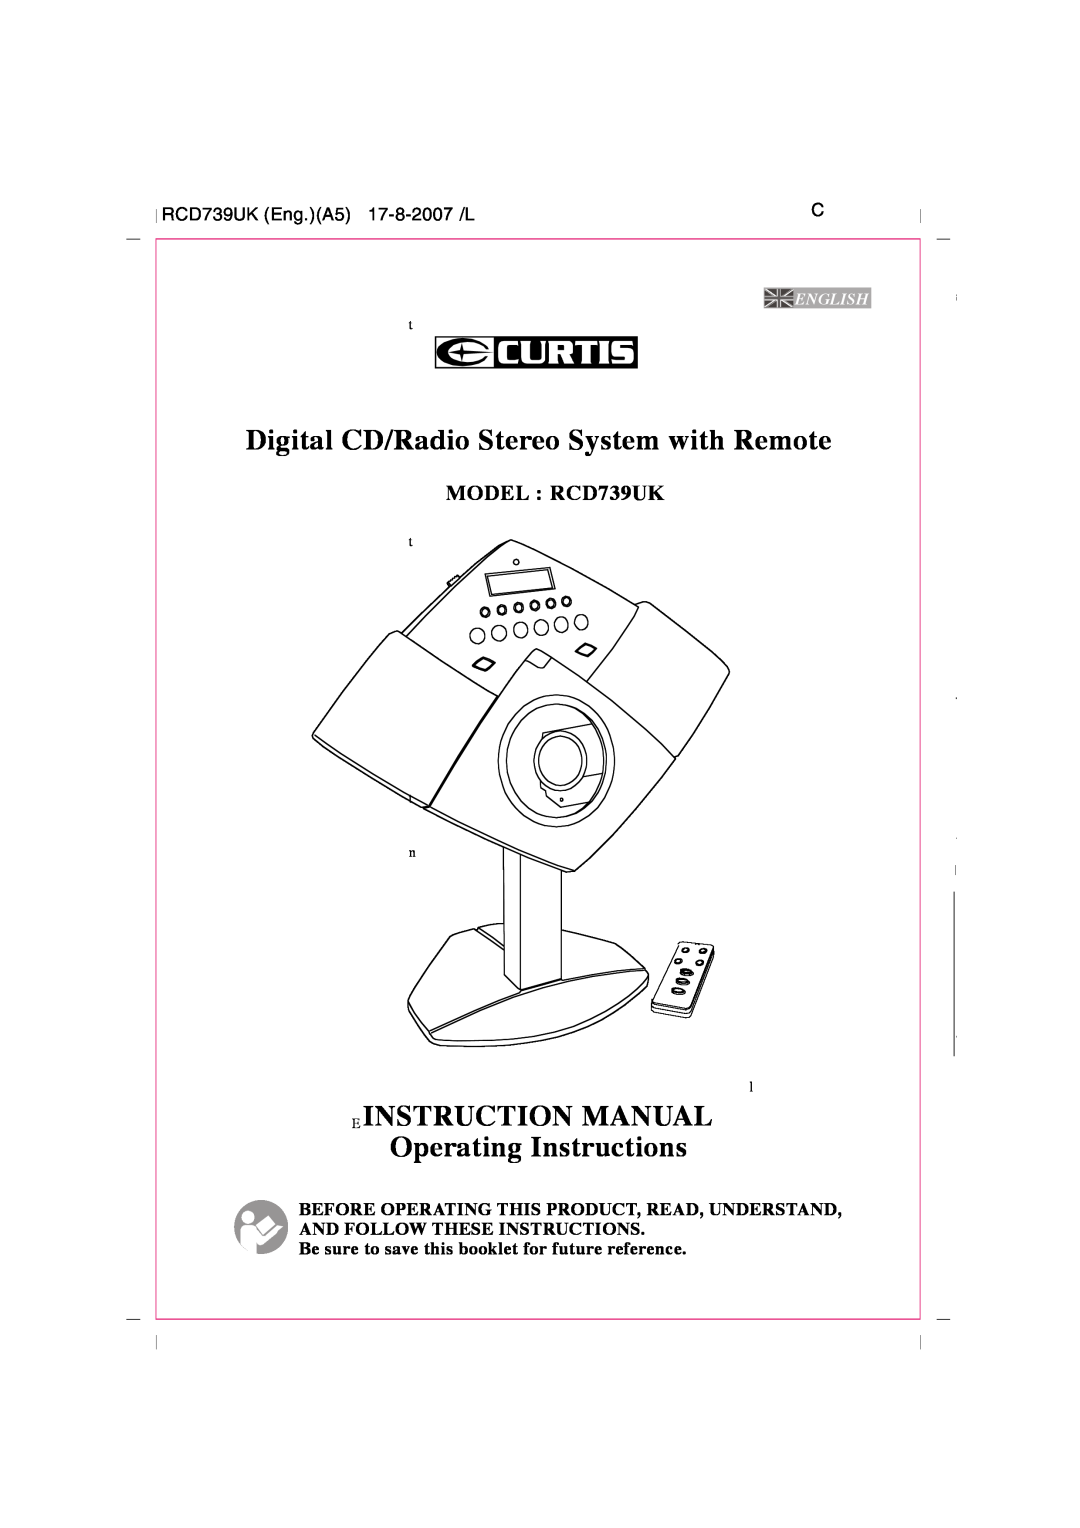 Curtis instruction manual RCD739UK Eng.A5 17-8-2007 /L, Be sure to save this booklet for future reference, English 